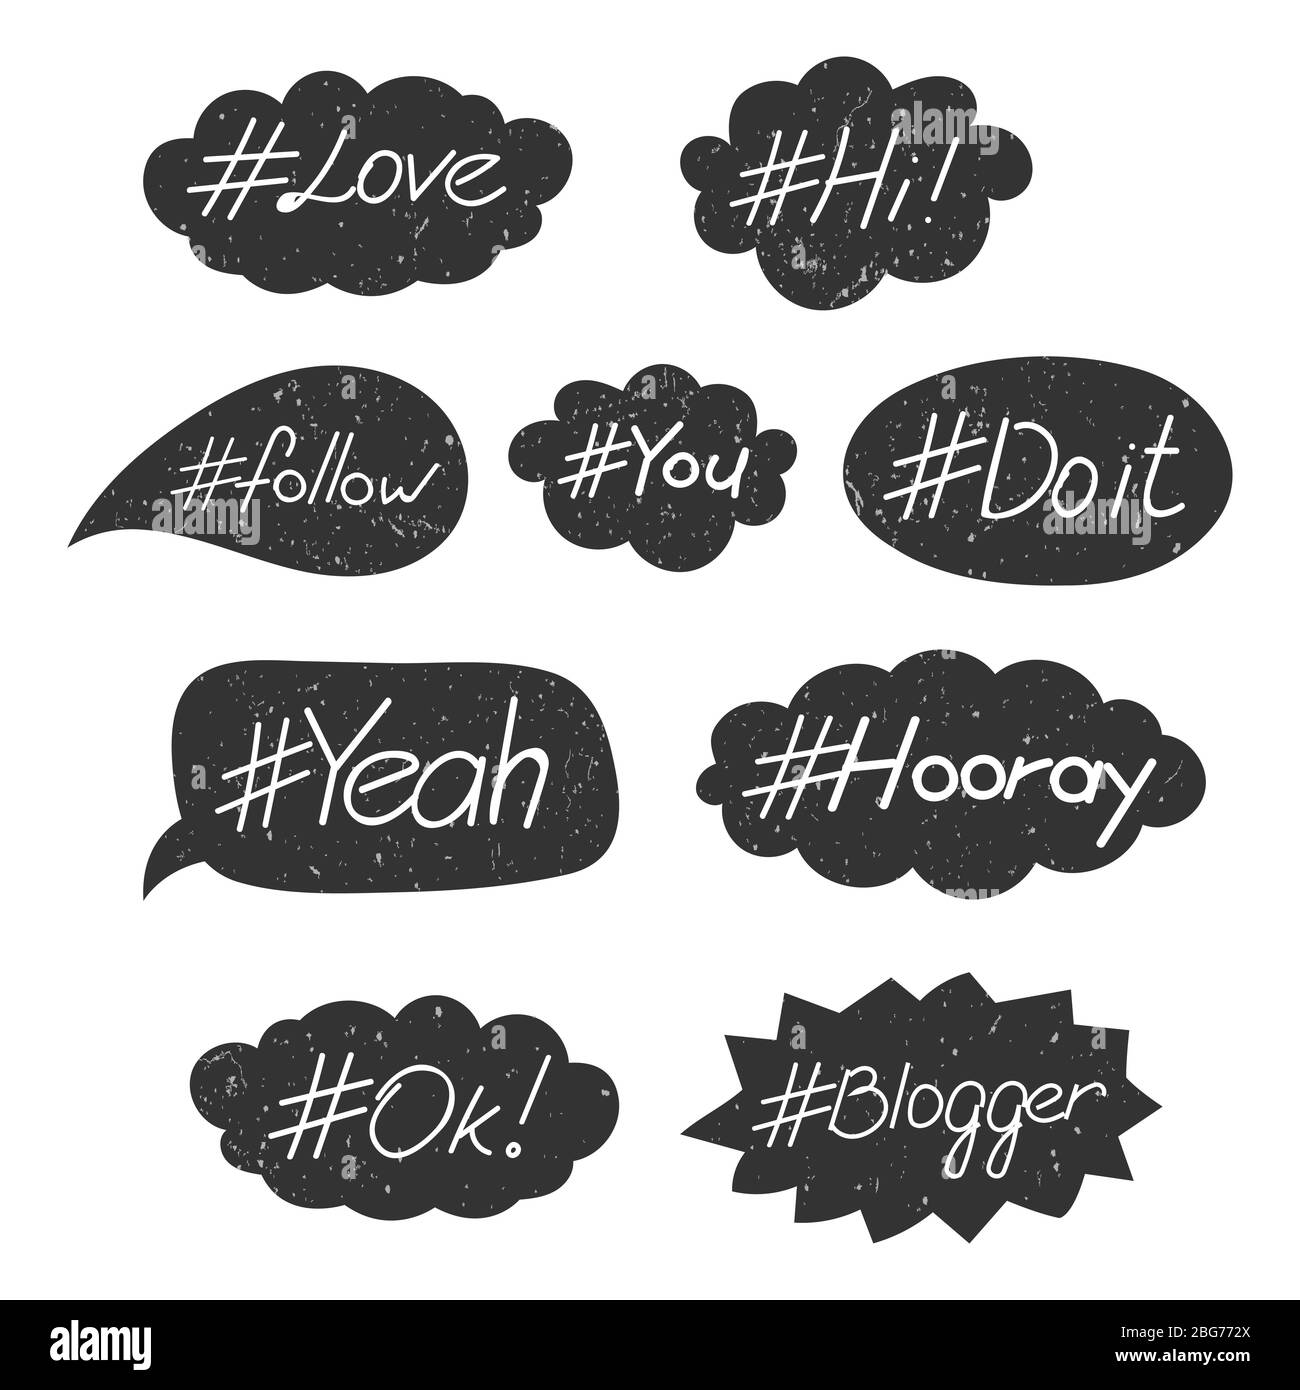 Grunge hand written hashtag words in speech bubble icons isolated on white background. Vector illustration Stock Vector